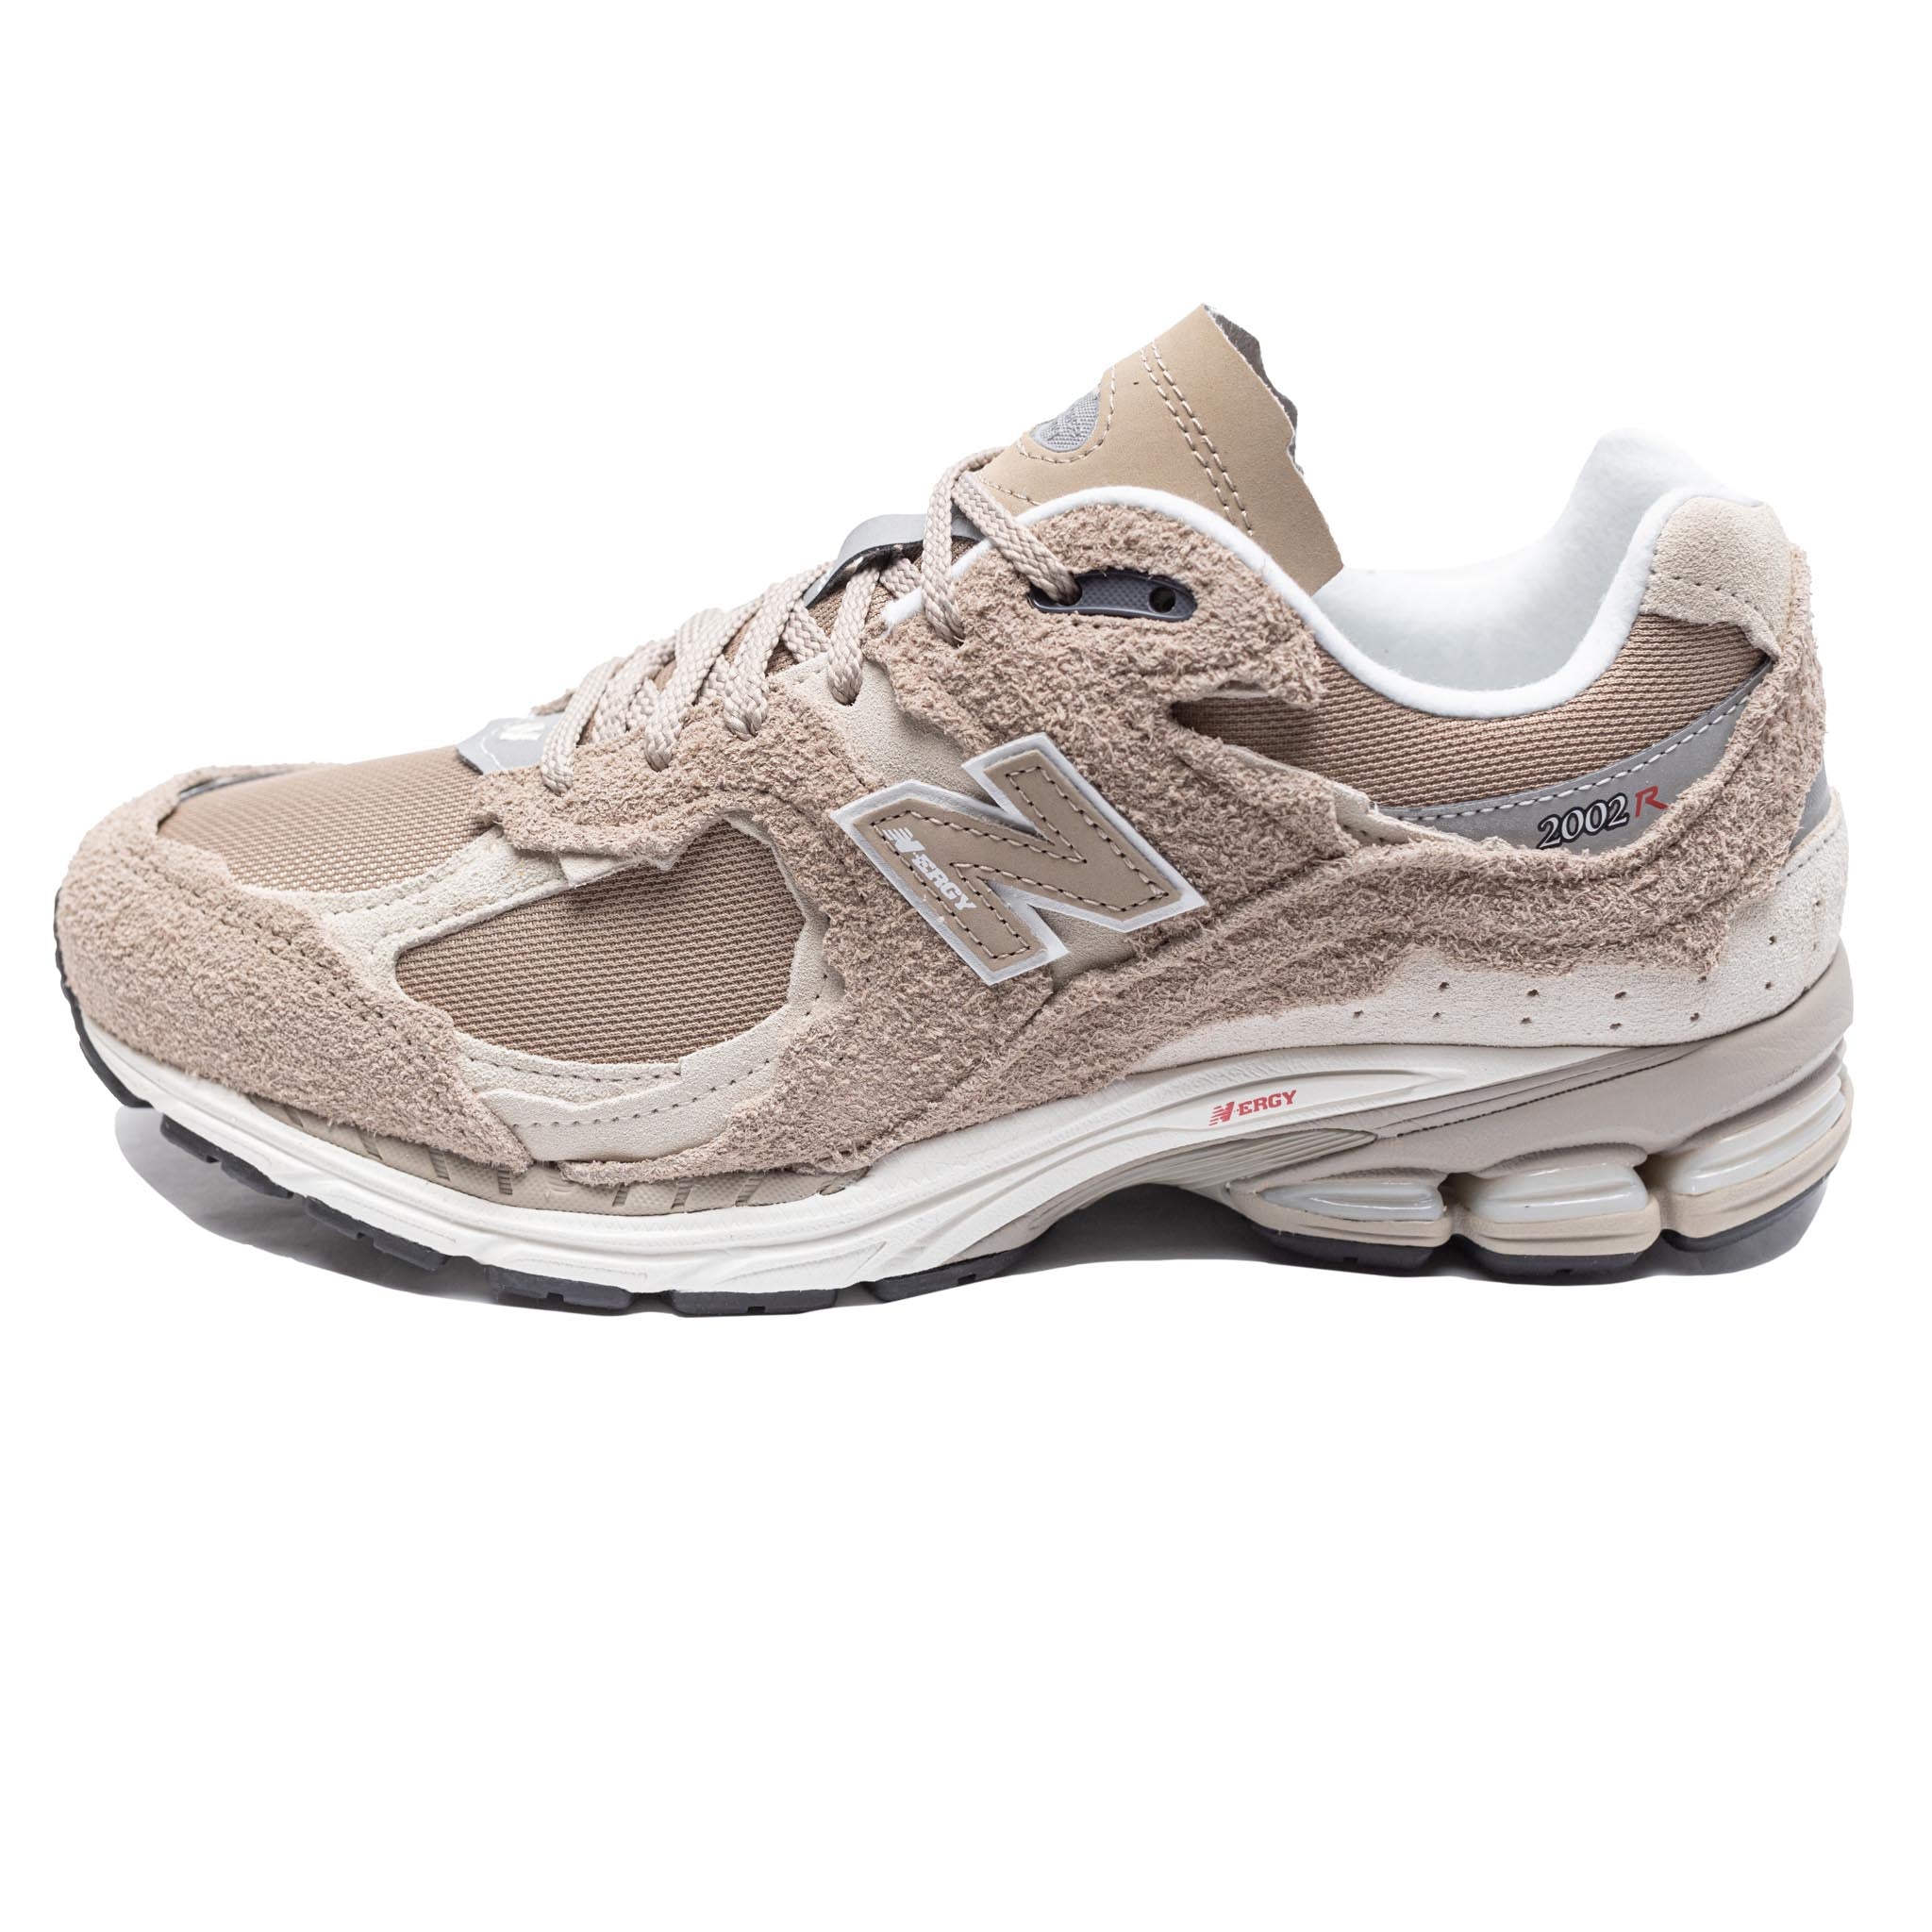 New Balance M2002RDL 'Protection Pack' Driftwood